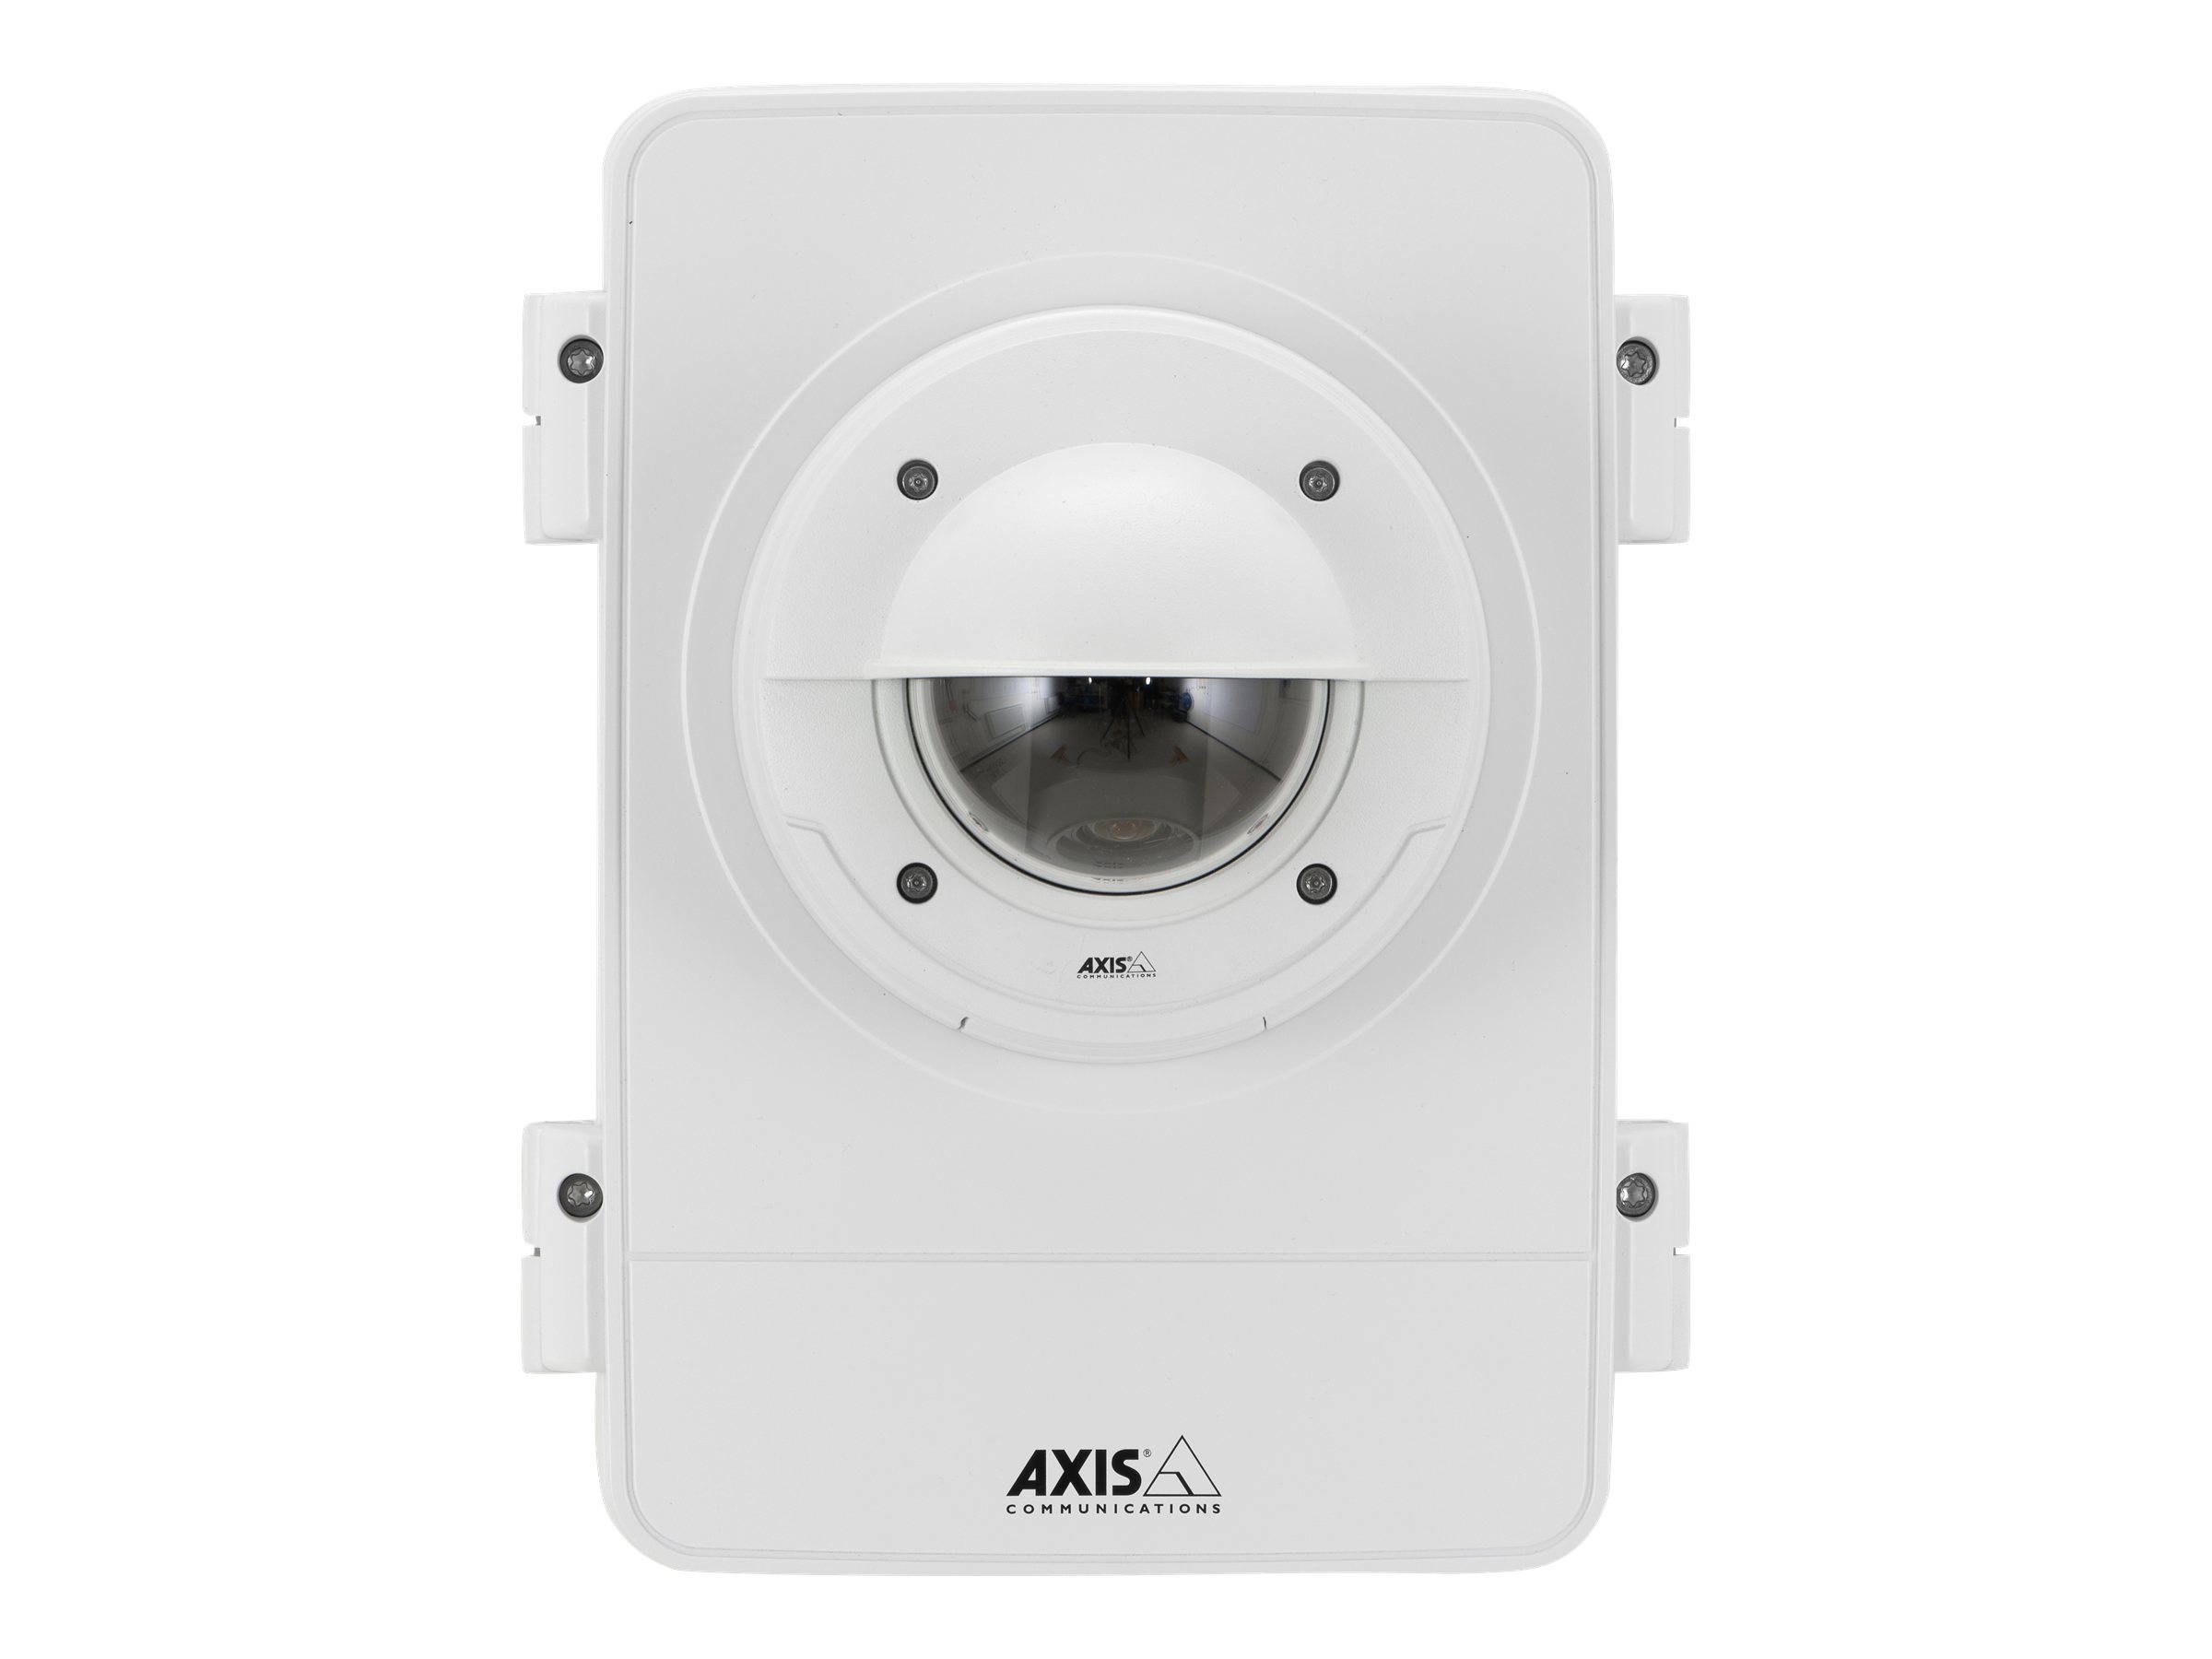 AXIS T98A17-VE SURVEILLANCE CABINET IP66, IK10 and NEMA 4X rated outdoor-ready surveillance cabinet. Protects accessory devices such as power supply, media converter, midspan and fuse from tough weather and vandalism. The camera is mounted on the door of 